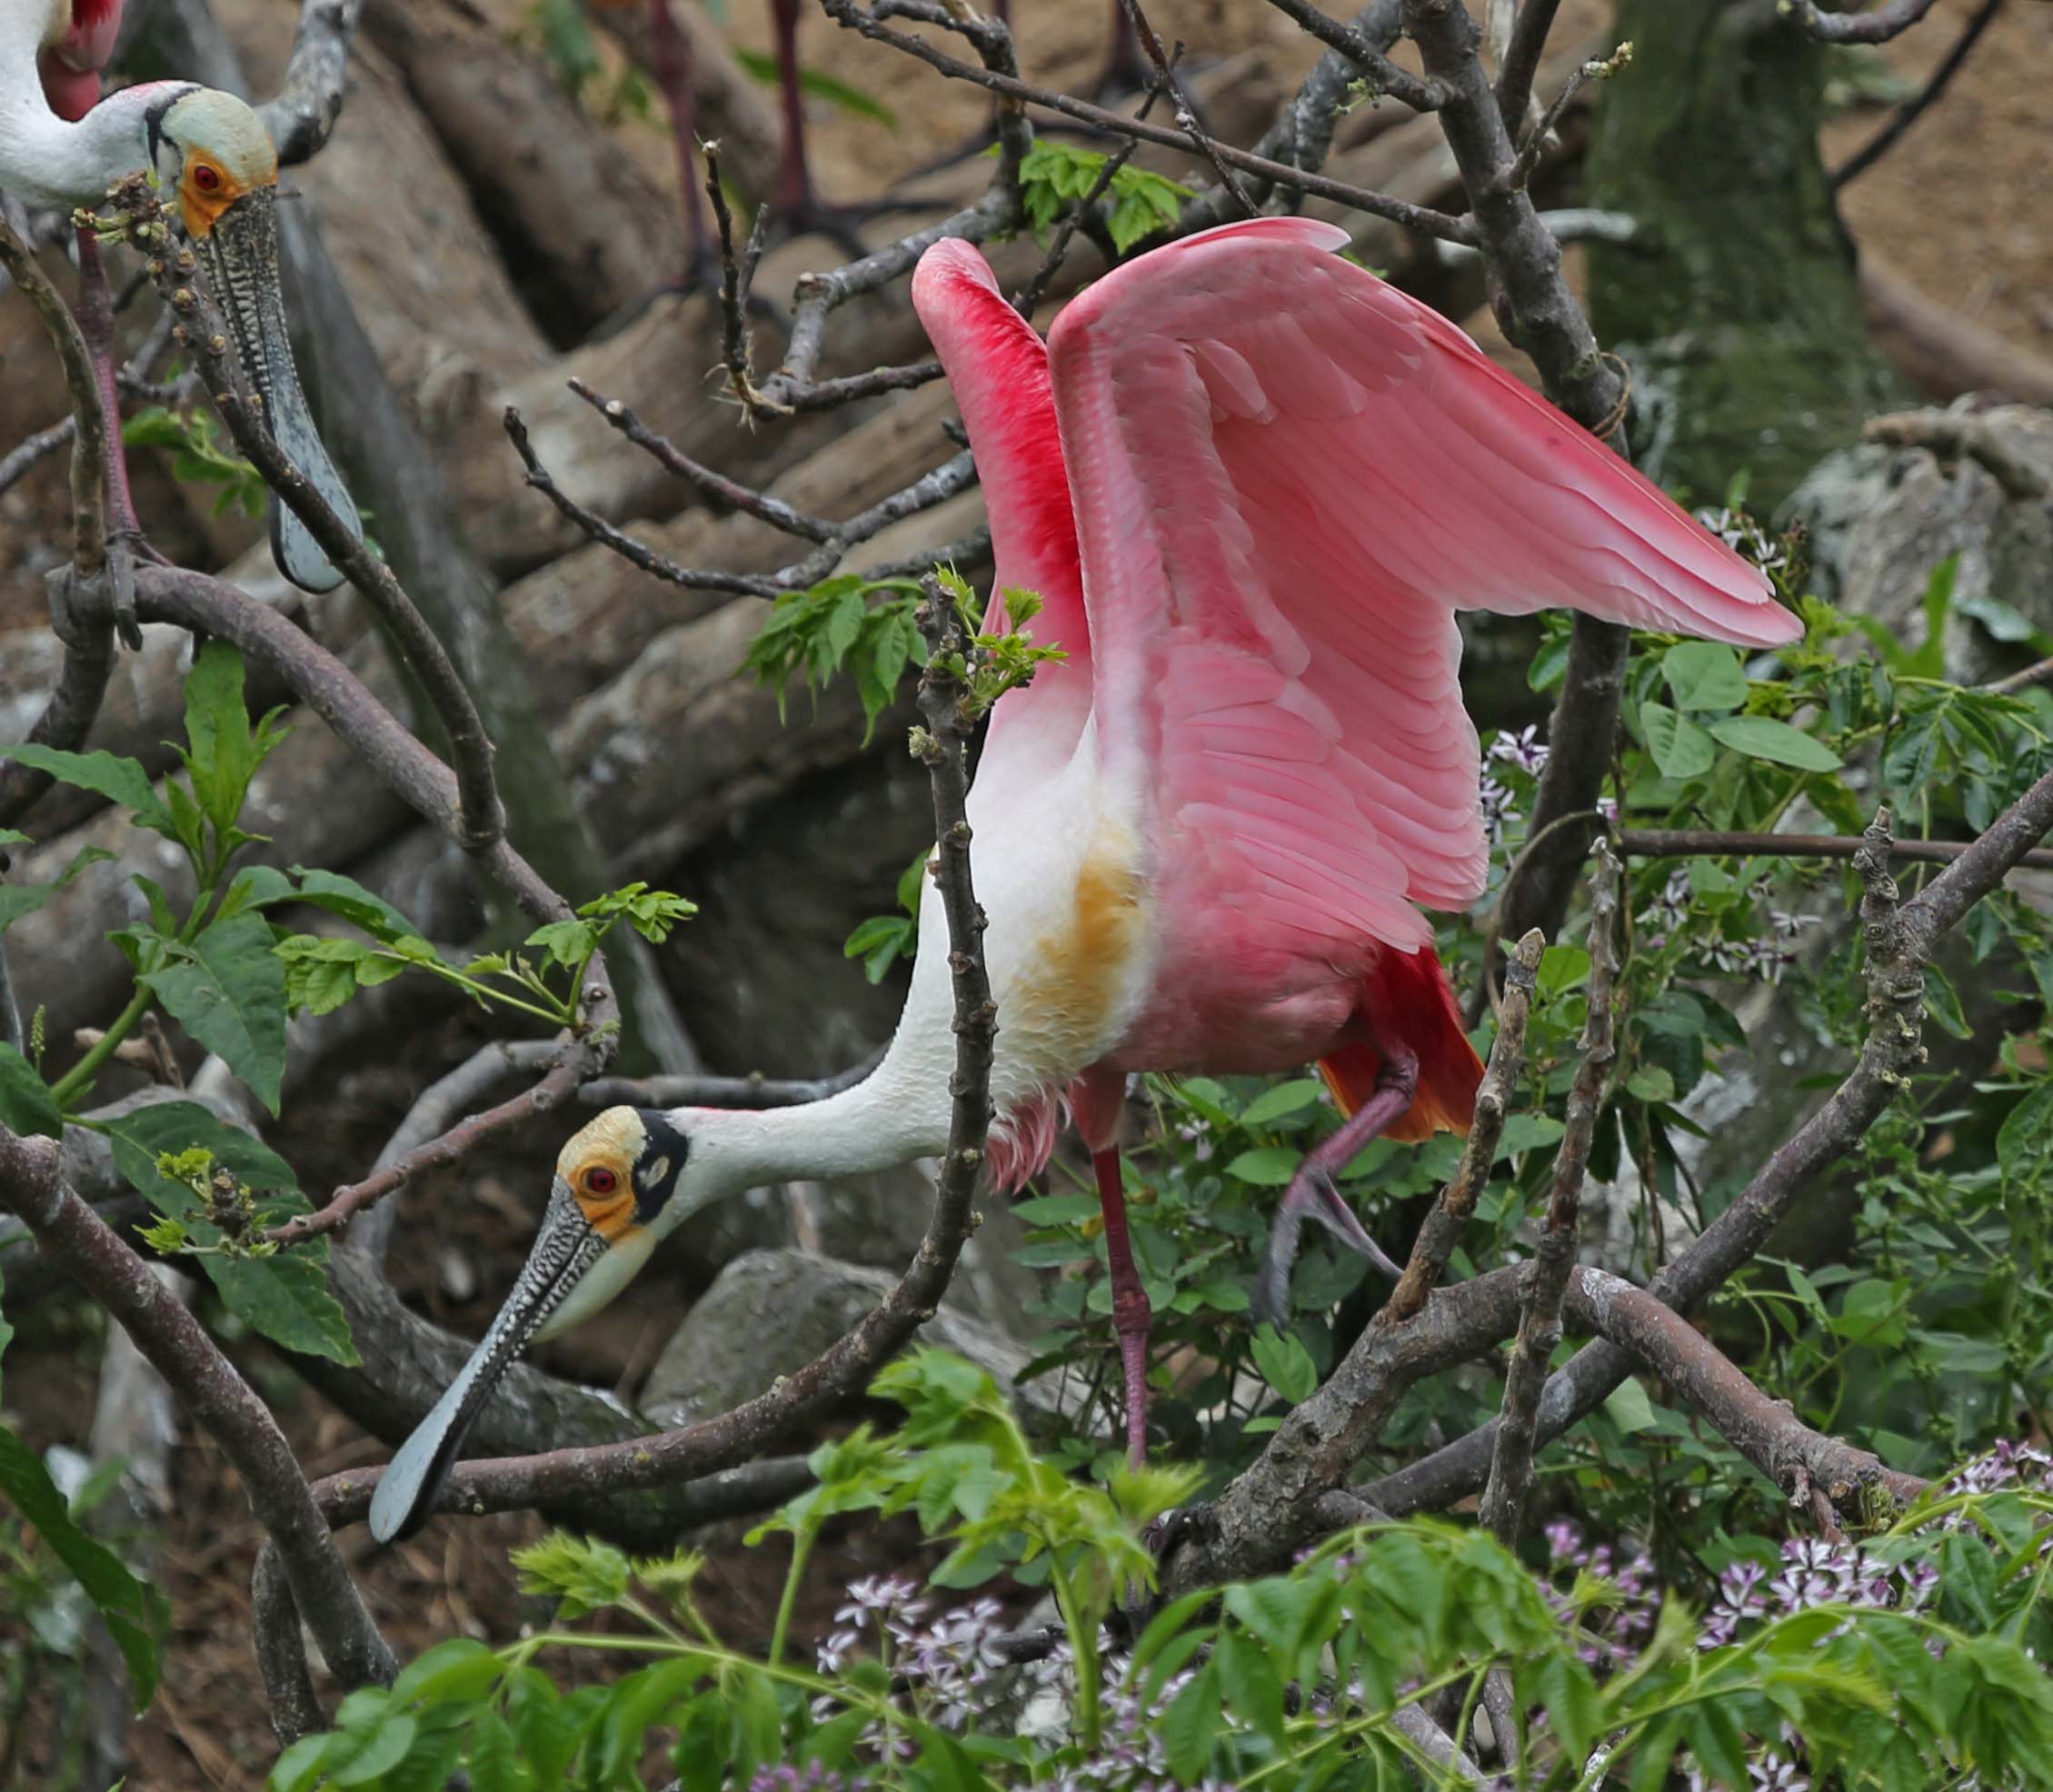 Texas 8 by 8 Texas 8 by 8 3dRose phl_260185_1 Pot Holder Roseate spoonbills bickering in the nest High Island